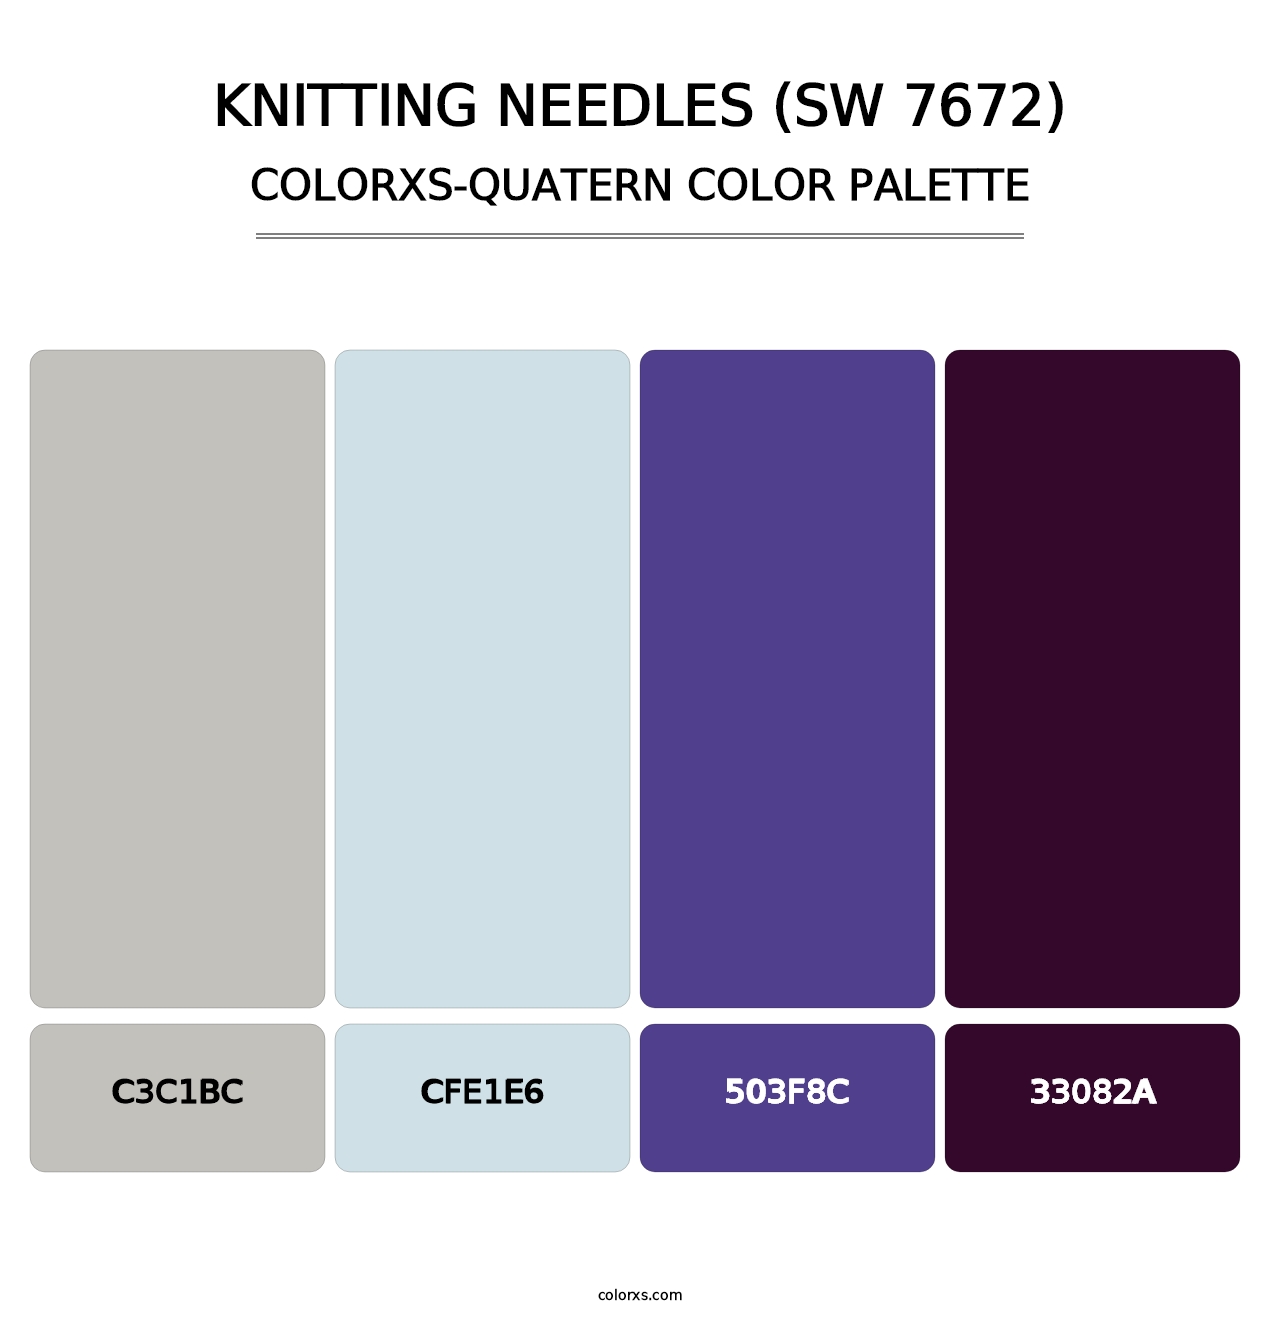 Knitting Needles (SW 7672) - Colorxs Quatern Palette